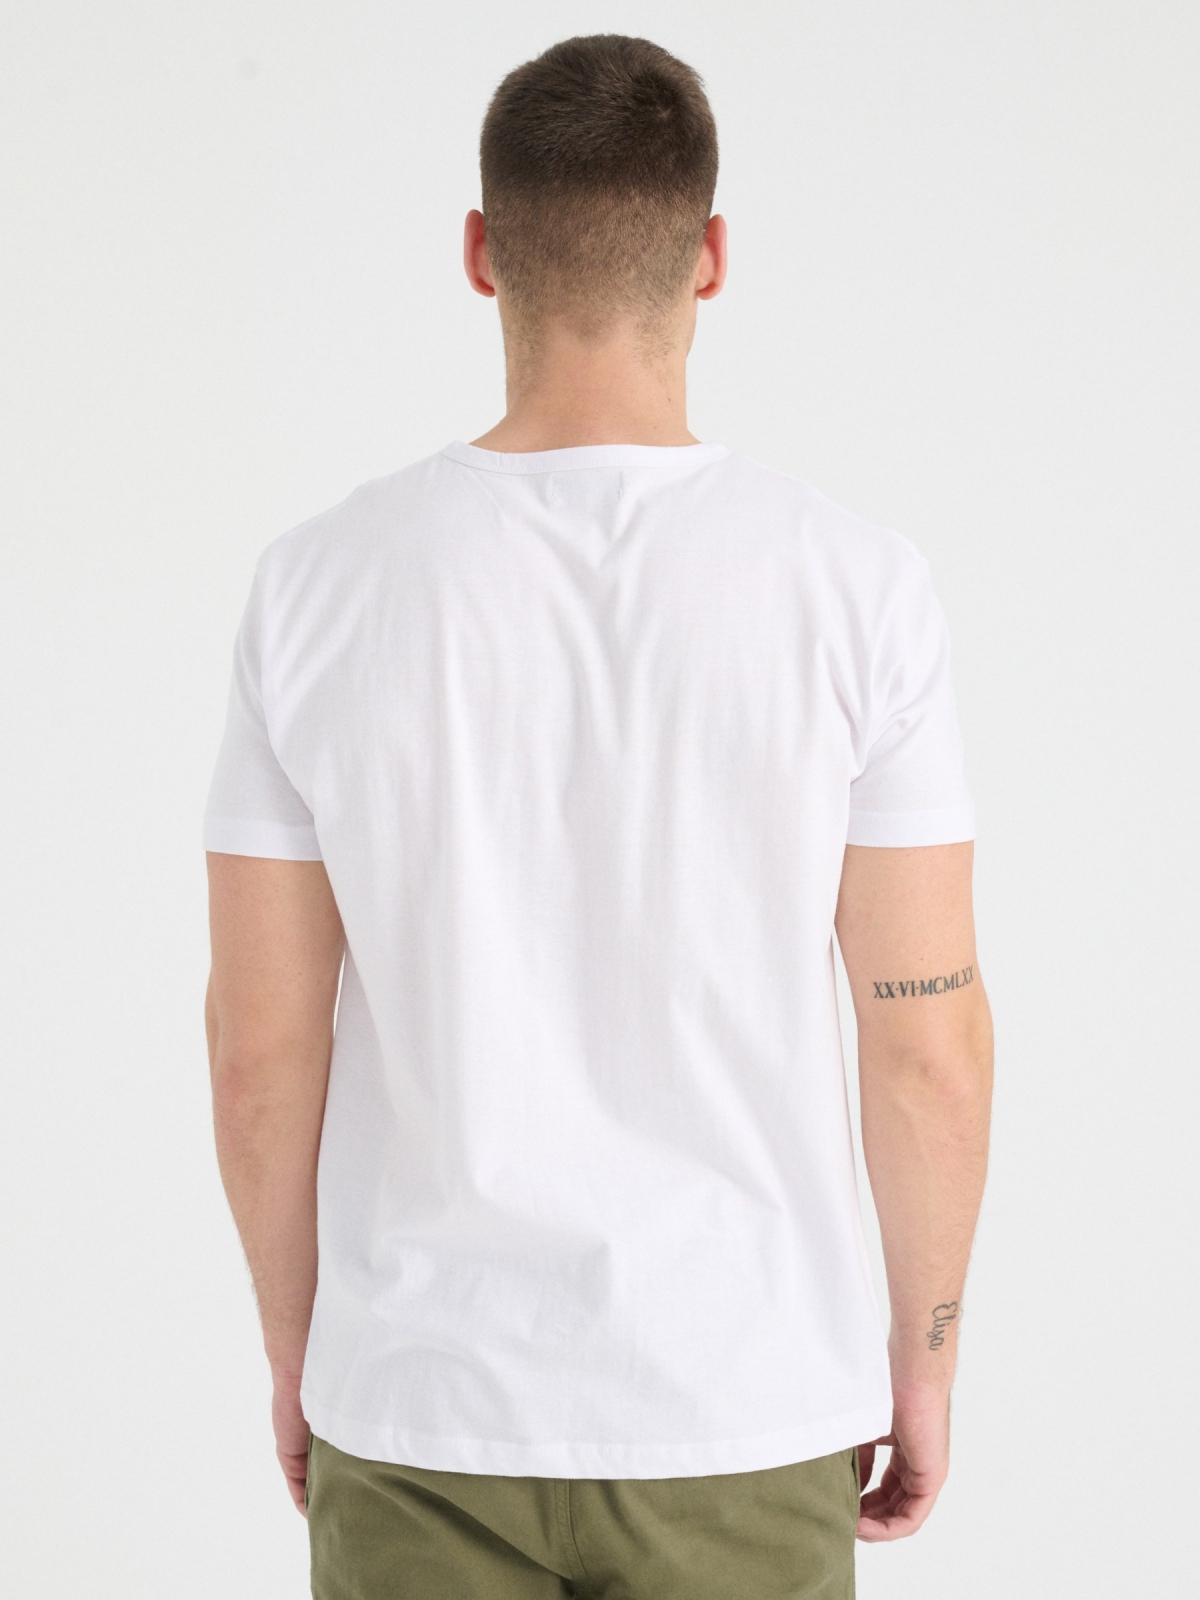 Buttons neck t-shirt white middle back view